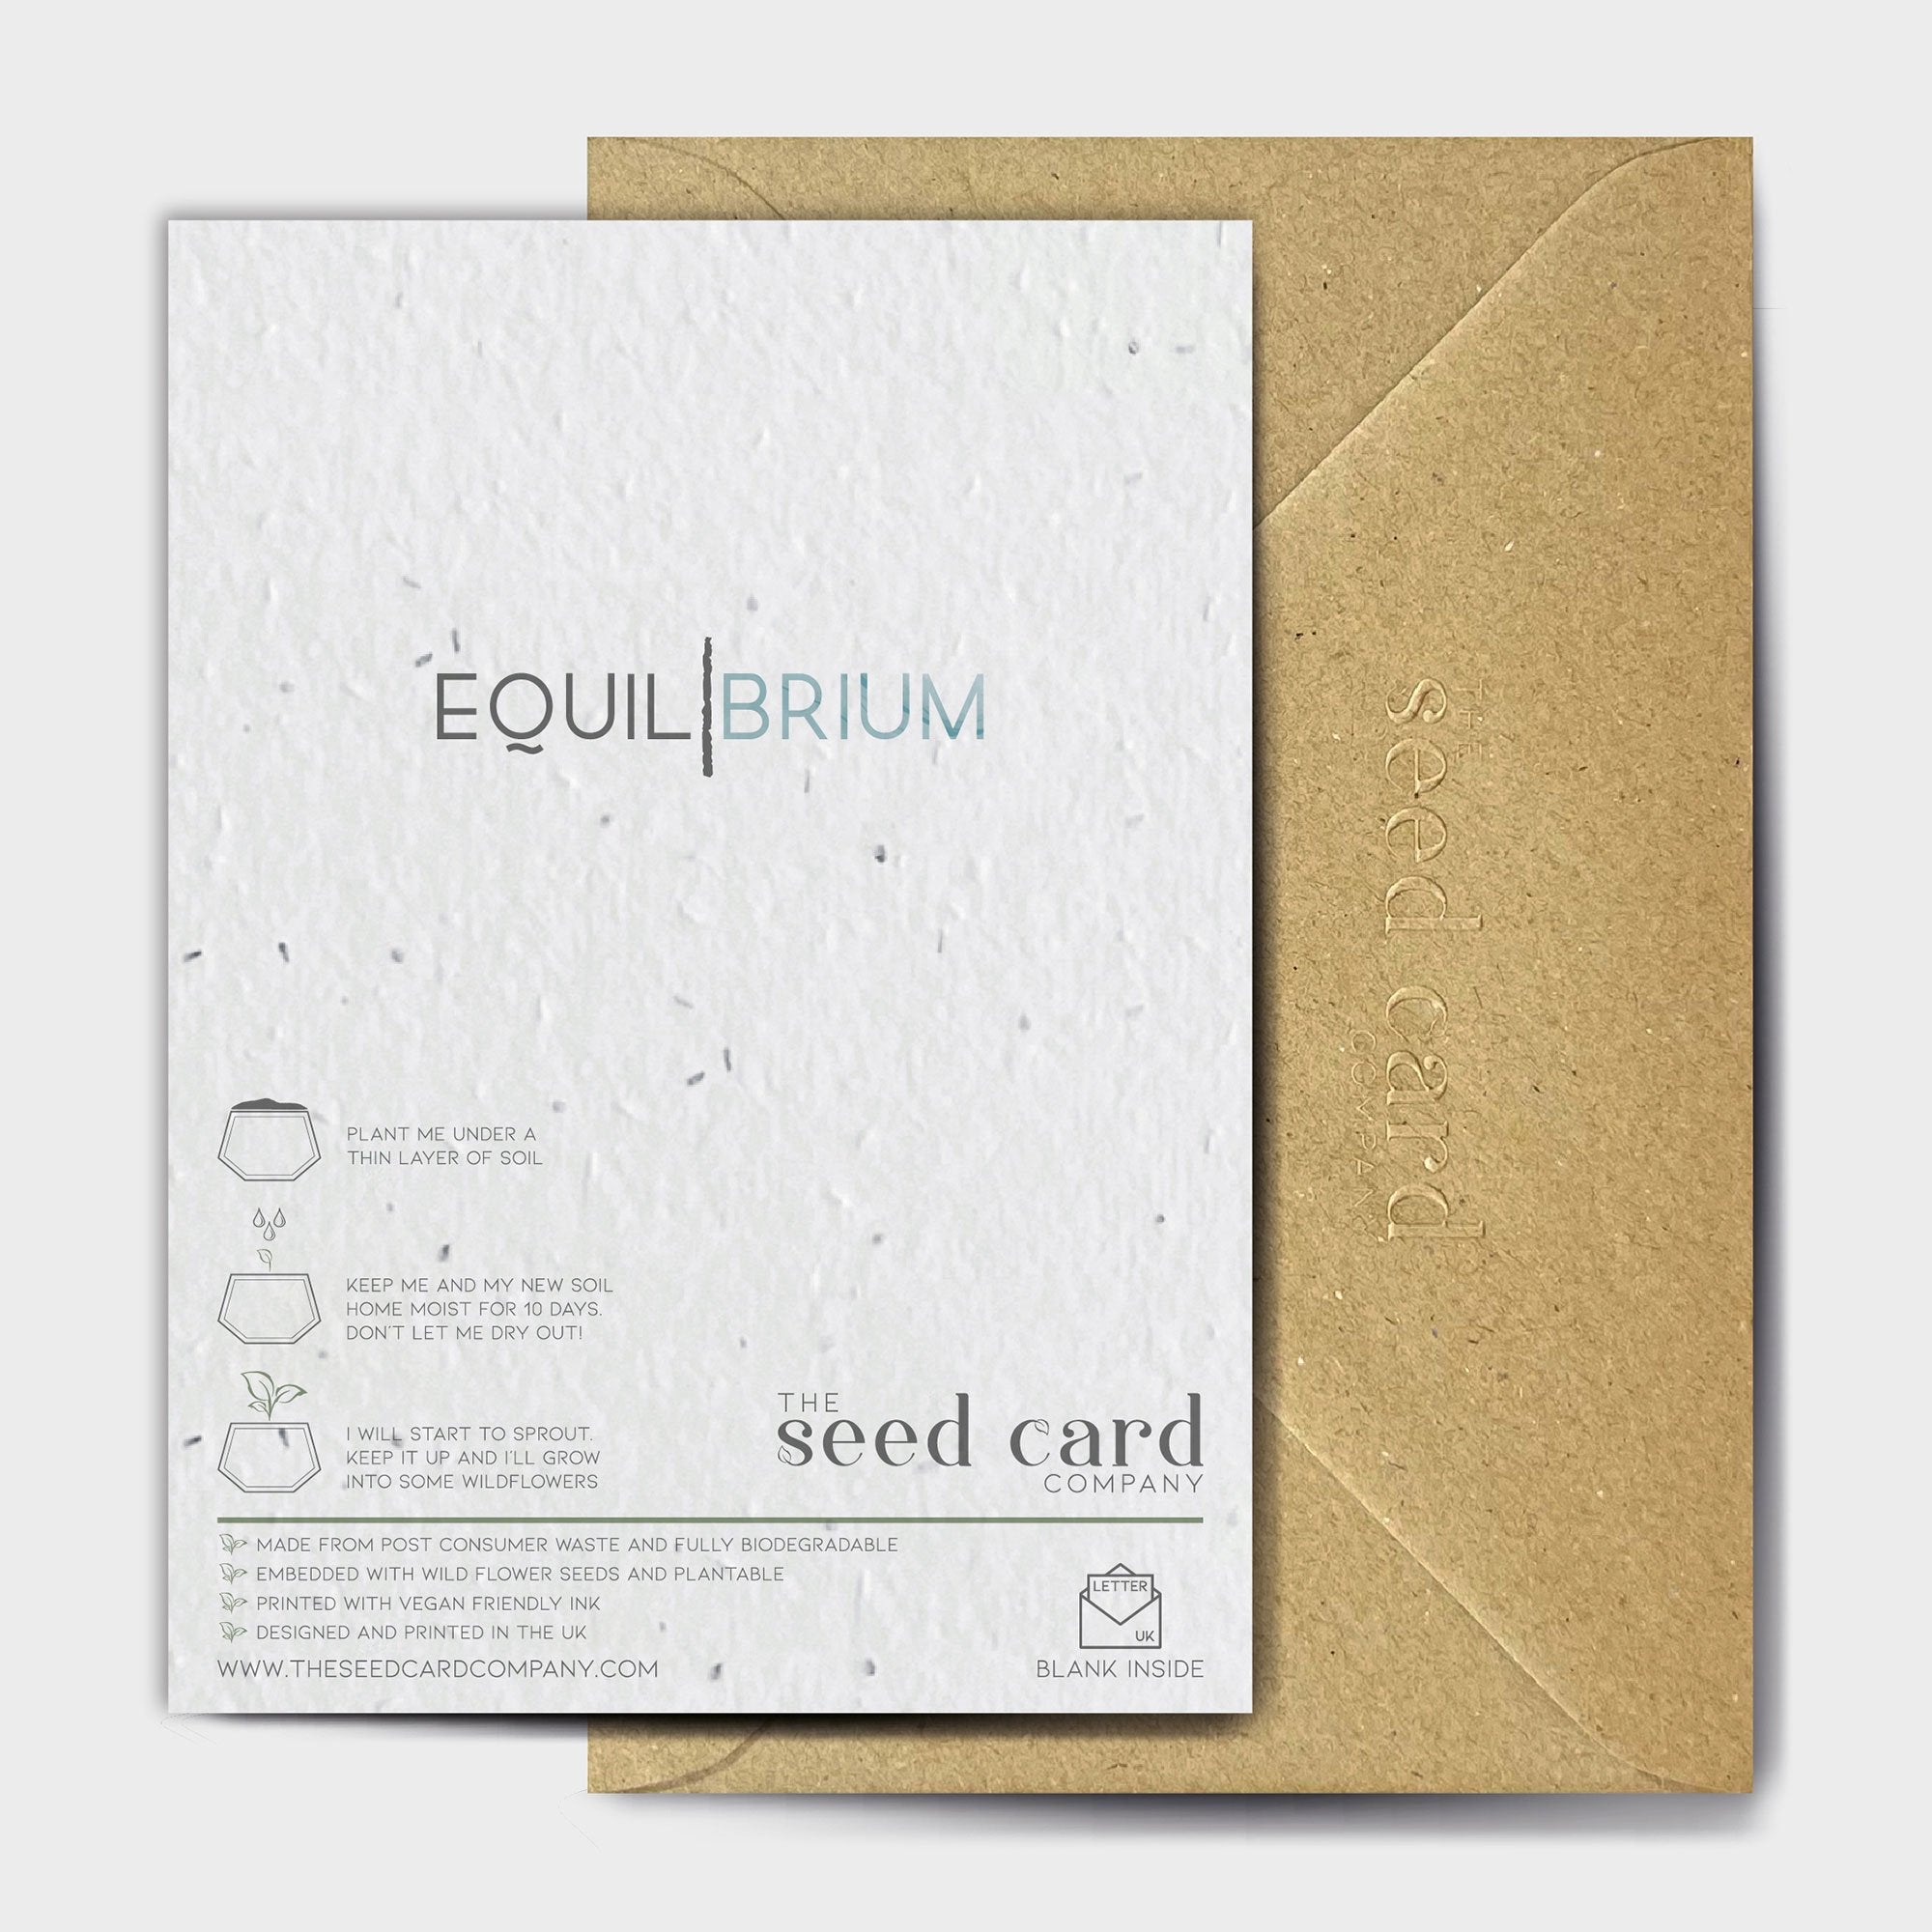 Shop online How to Take Off - 100% biodegradable seed-embedded cards Shop -The Seed Card Company